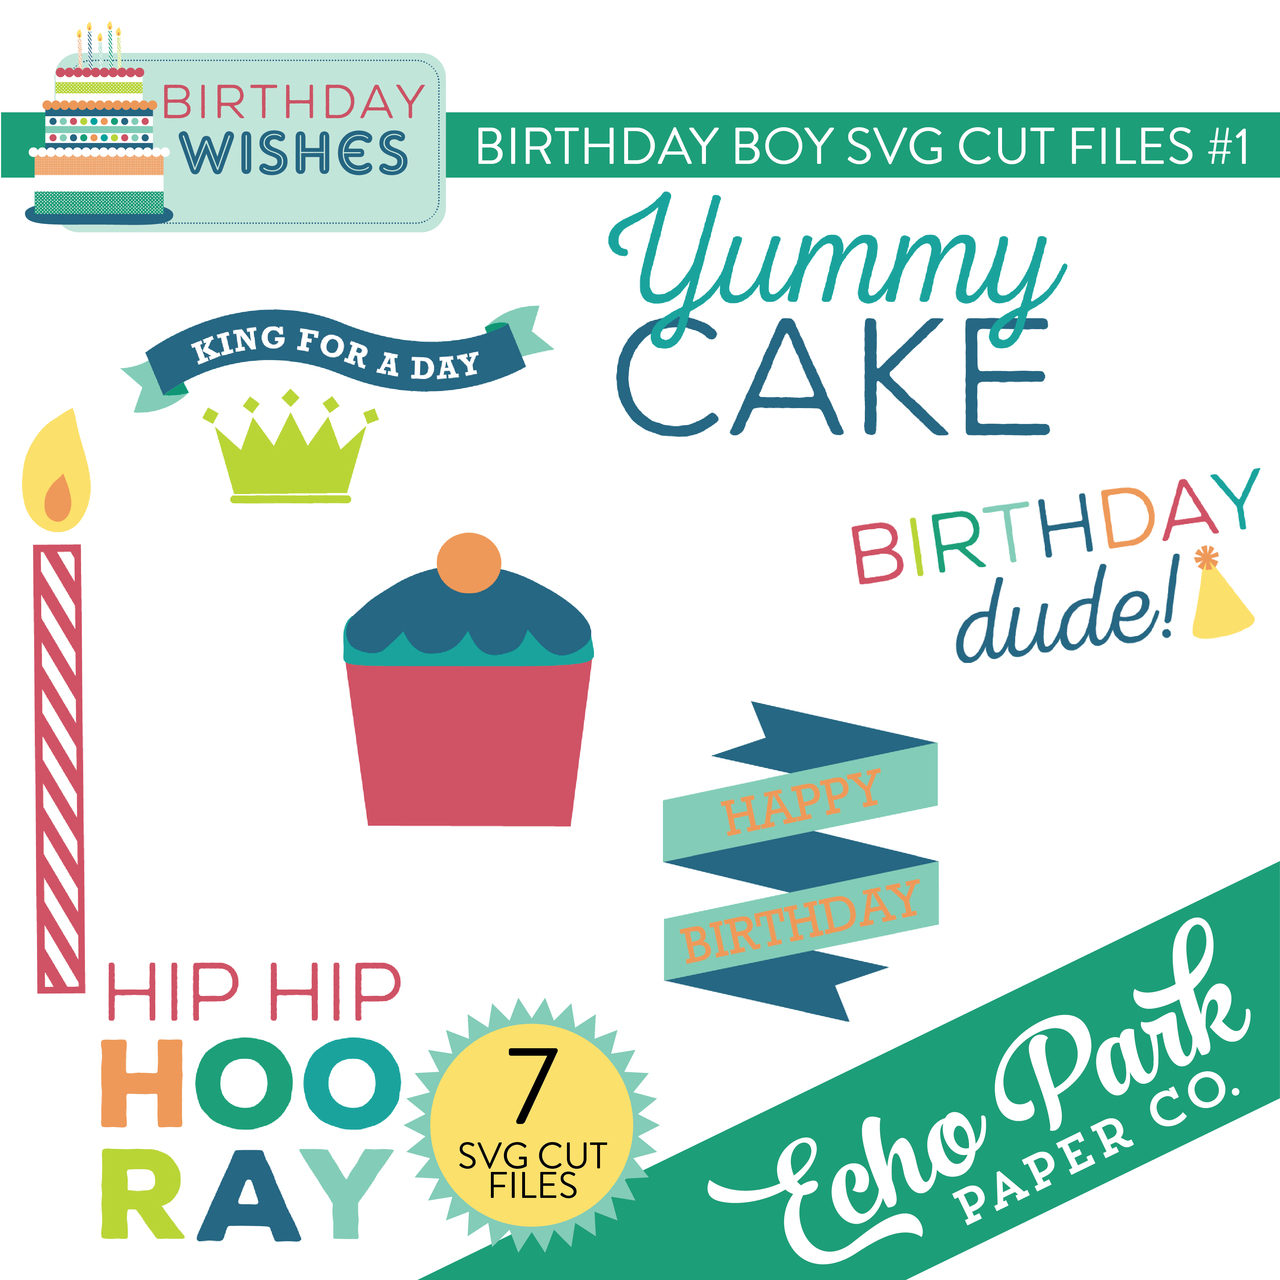 Download Birthday Wishes Boy SVG Cut Files #1 - Snap Click Supply Co.